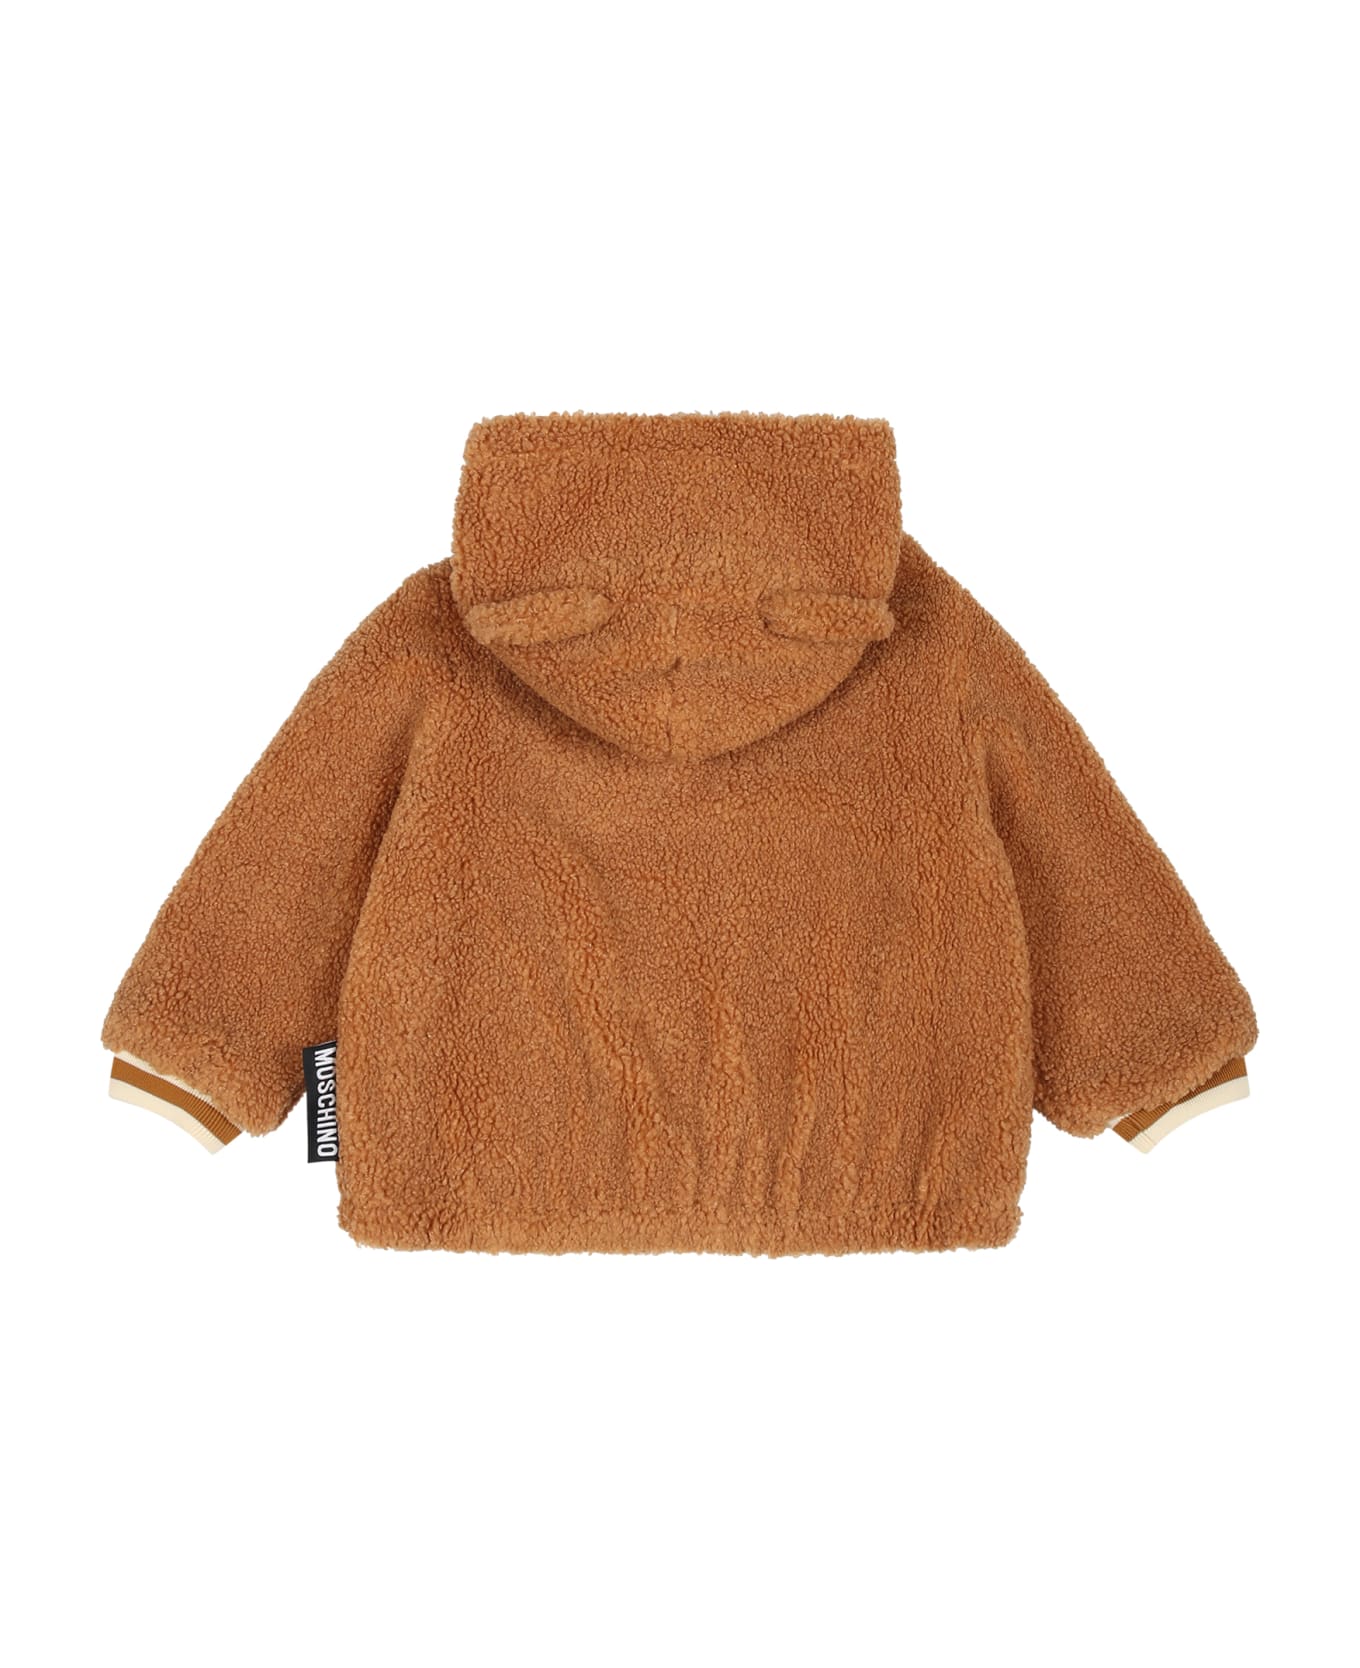 Moschino Brown Coat For Babykids With Teddy Bear - BEIGE